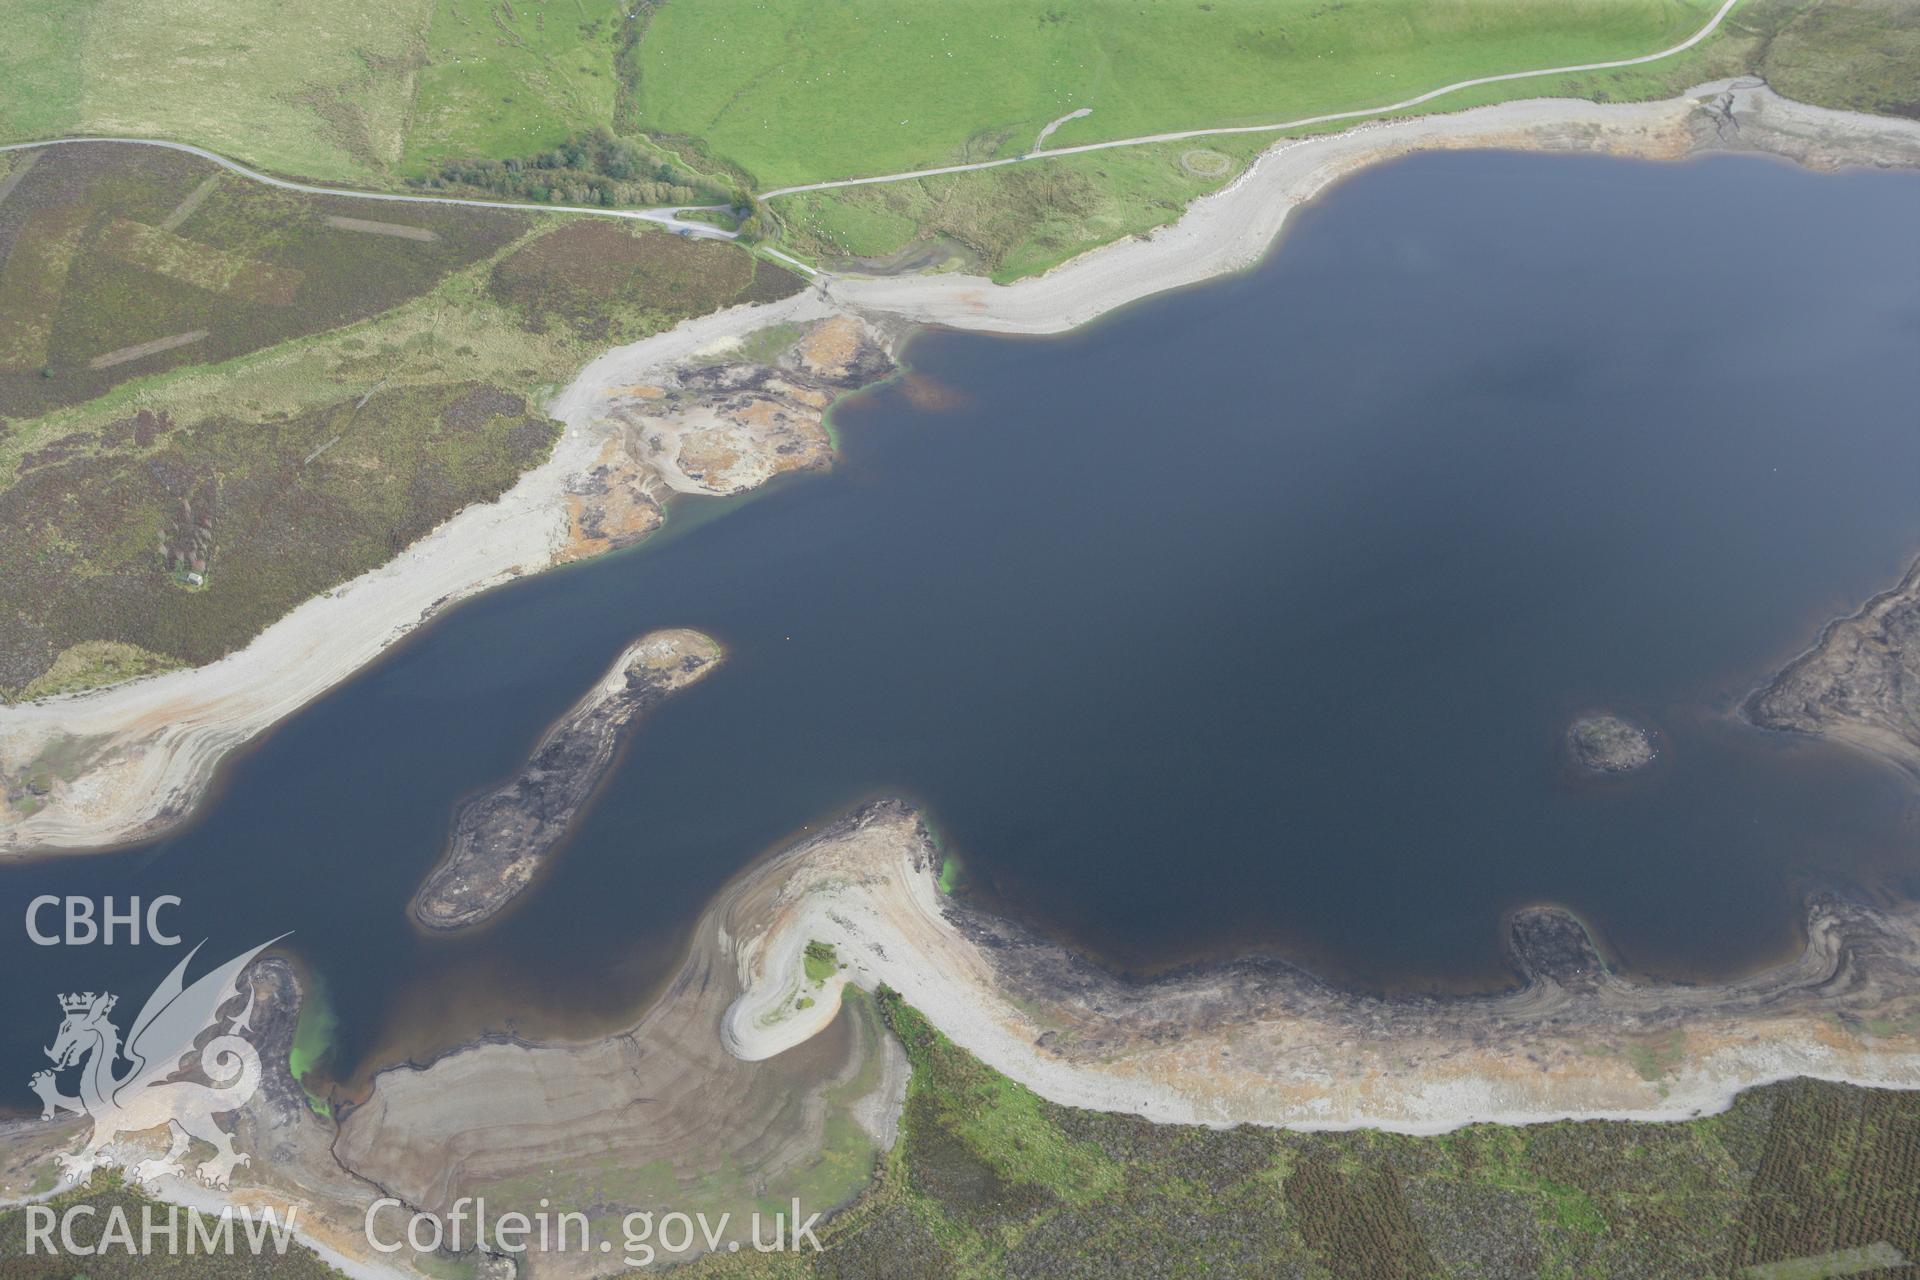 RCAHMW colour oblique aerial photograph of Llyn Brenig with low water. Taken on 13 October 2009 by Toby Driver